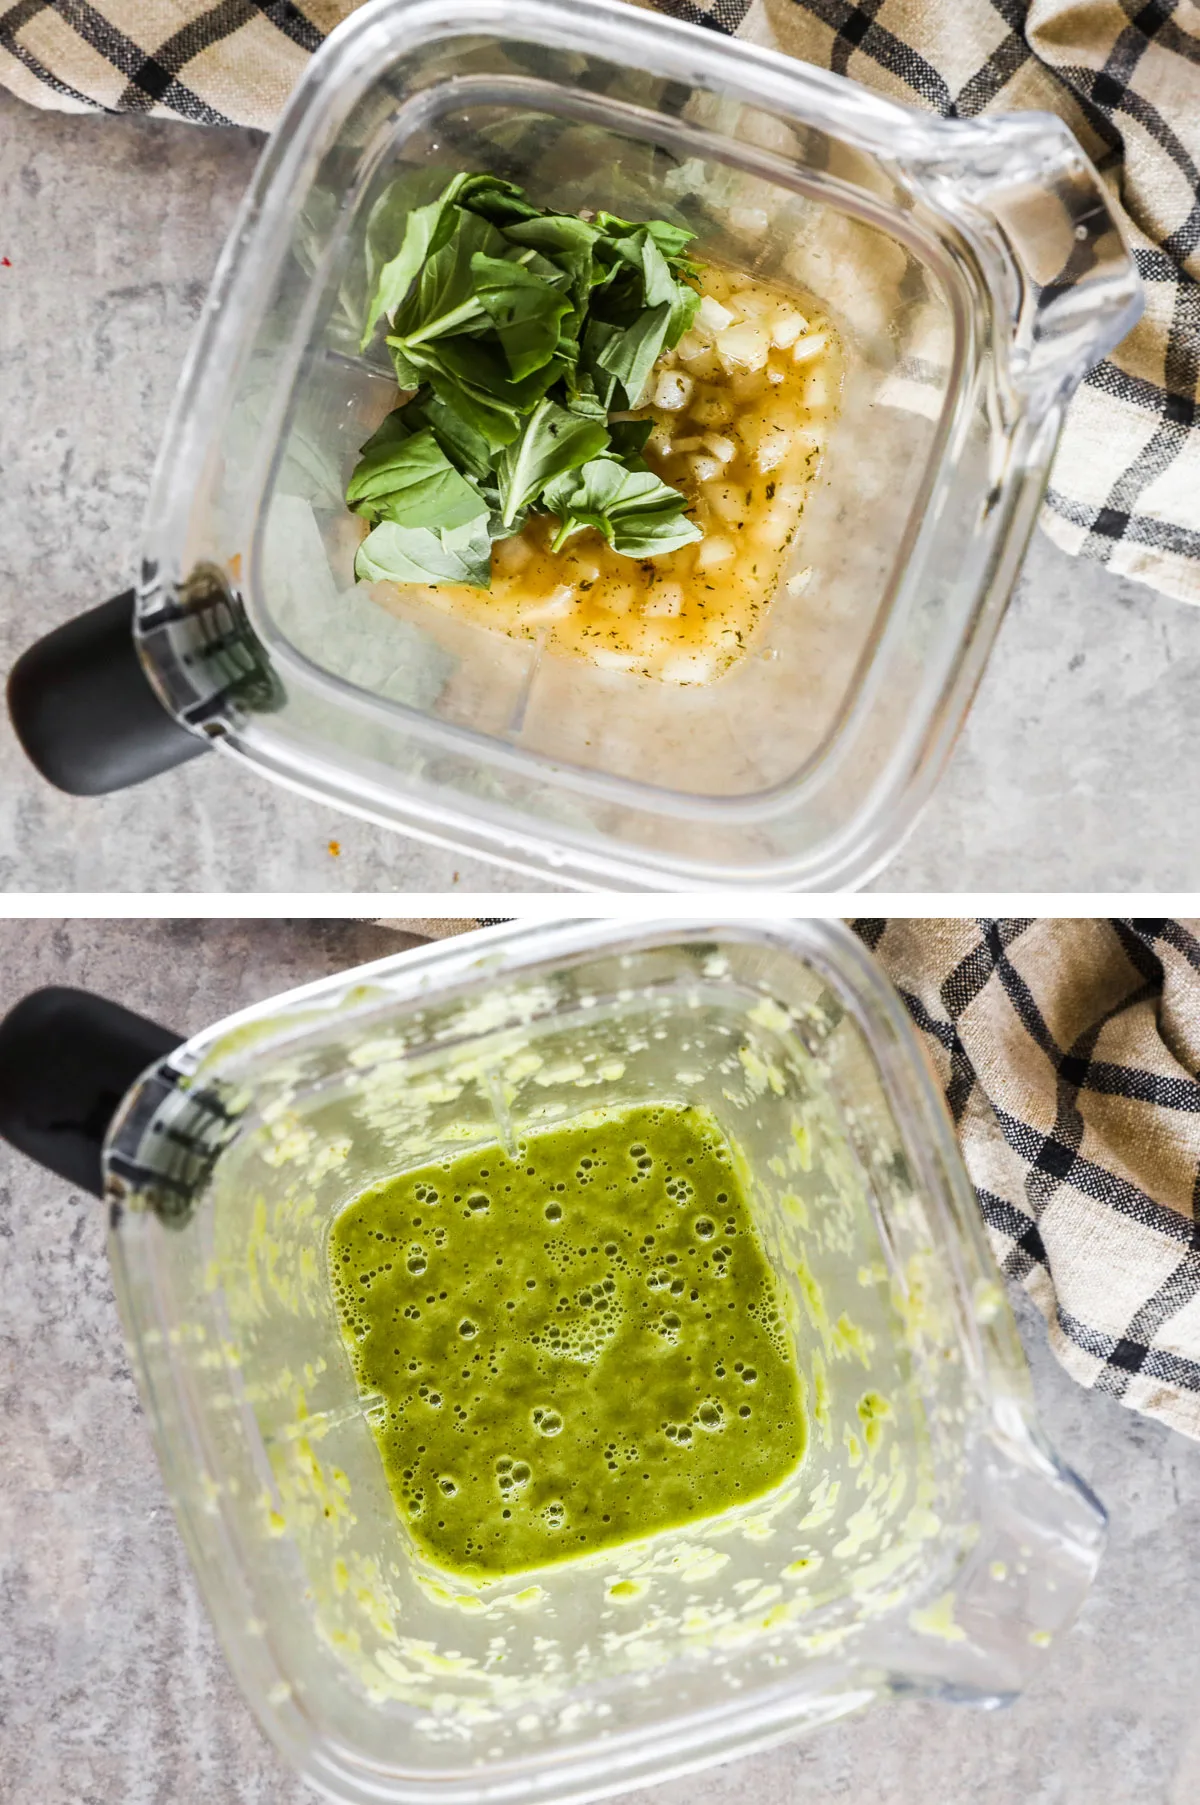 A blender with chopped cooked onion, broth and basil. First unmixed and then blended to a green creamy mixture.